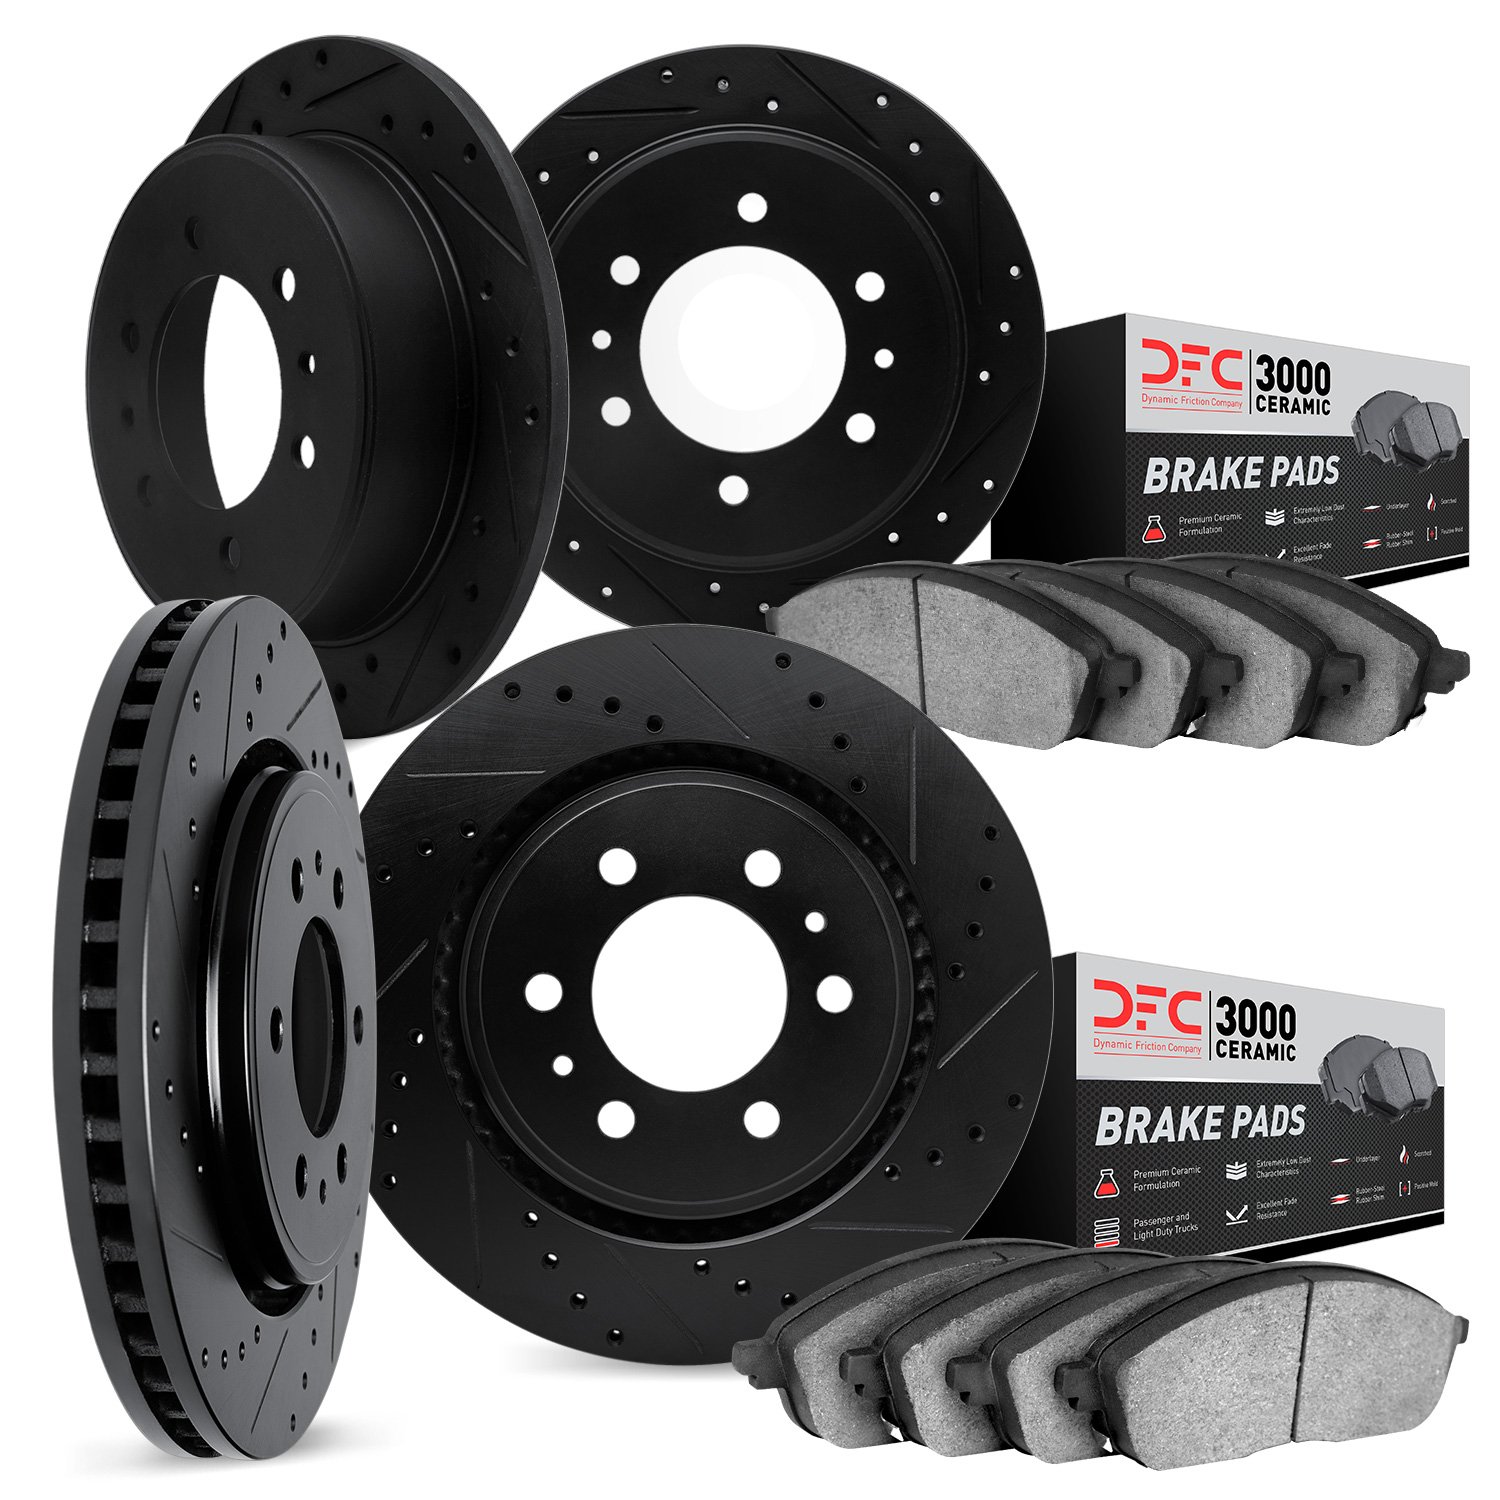 8304-72021 Drilled/Slotted Brake Rotors with 3000-Series Ceramic Brake Pads Kit [Black], 1990-2000 Mitsubishi, Position: Front a